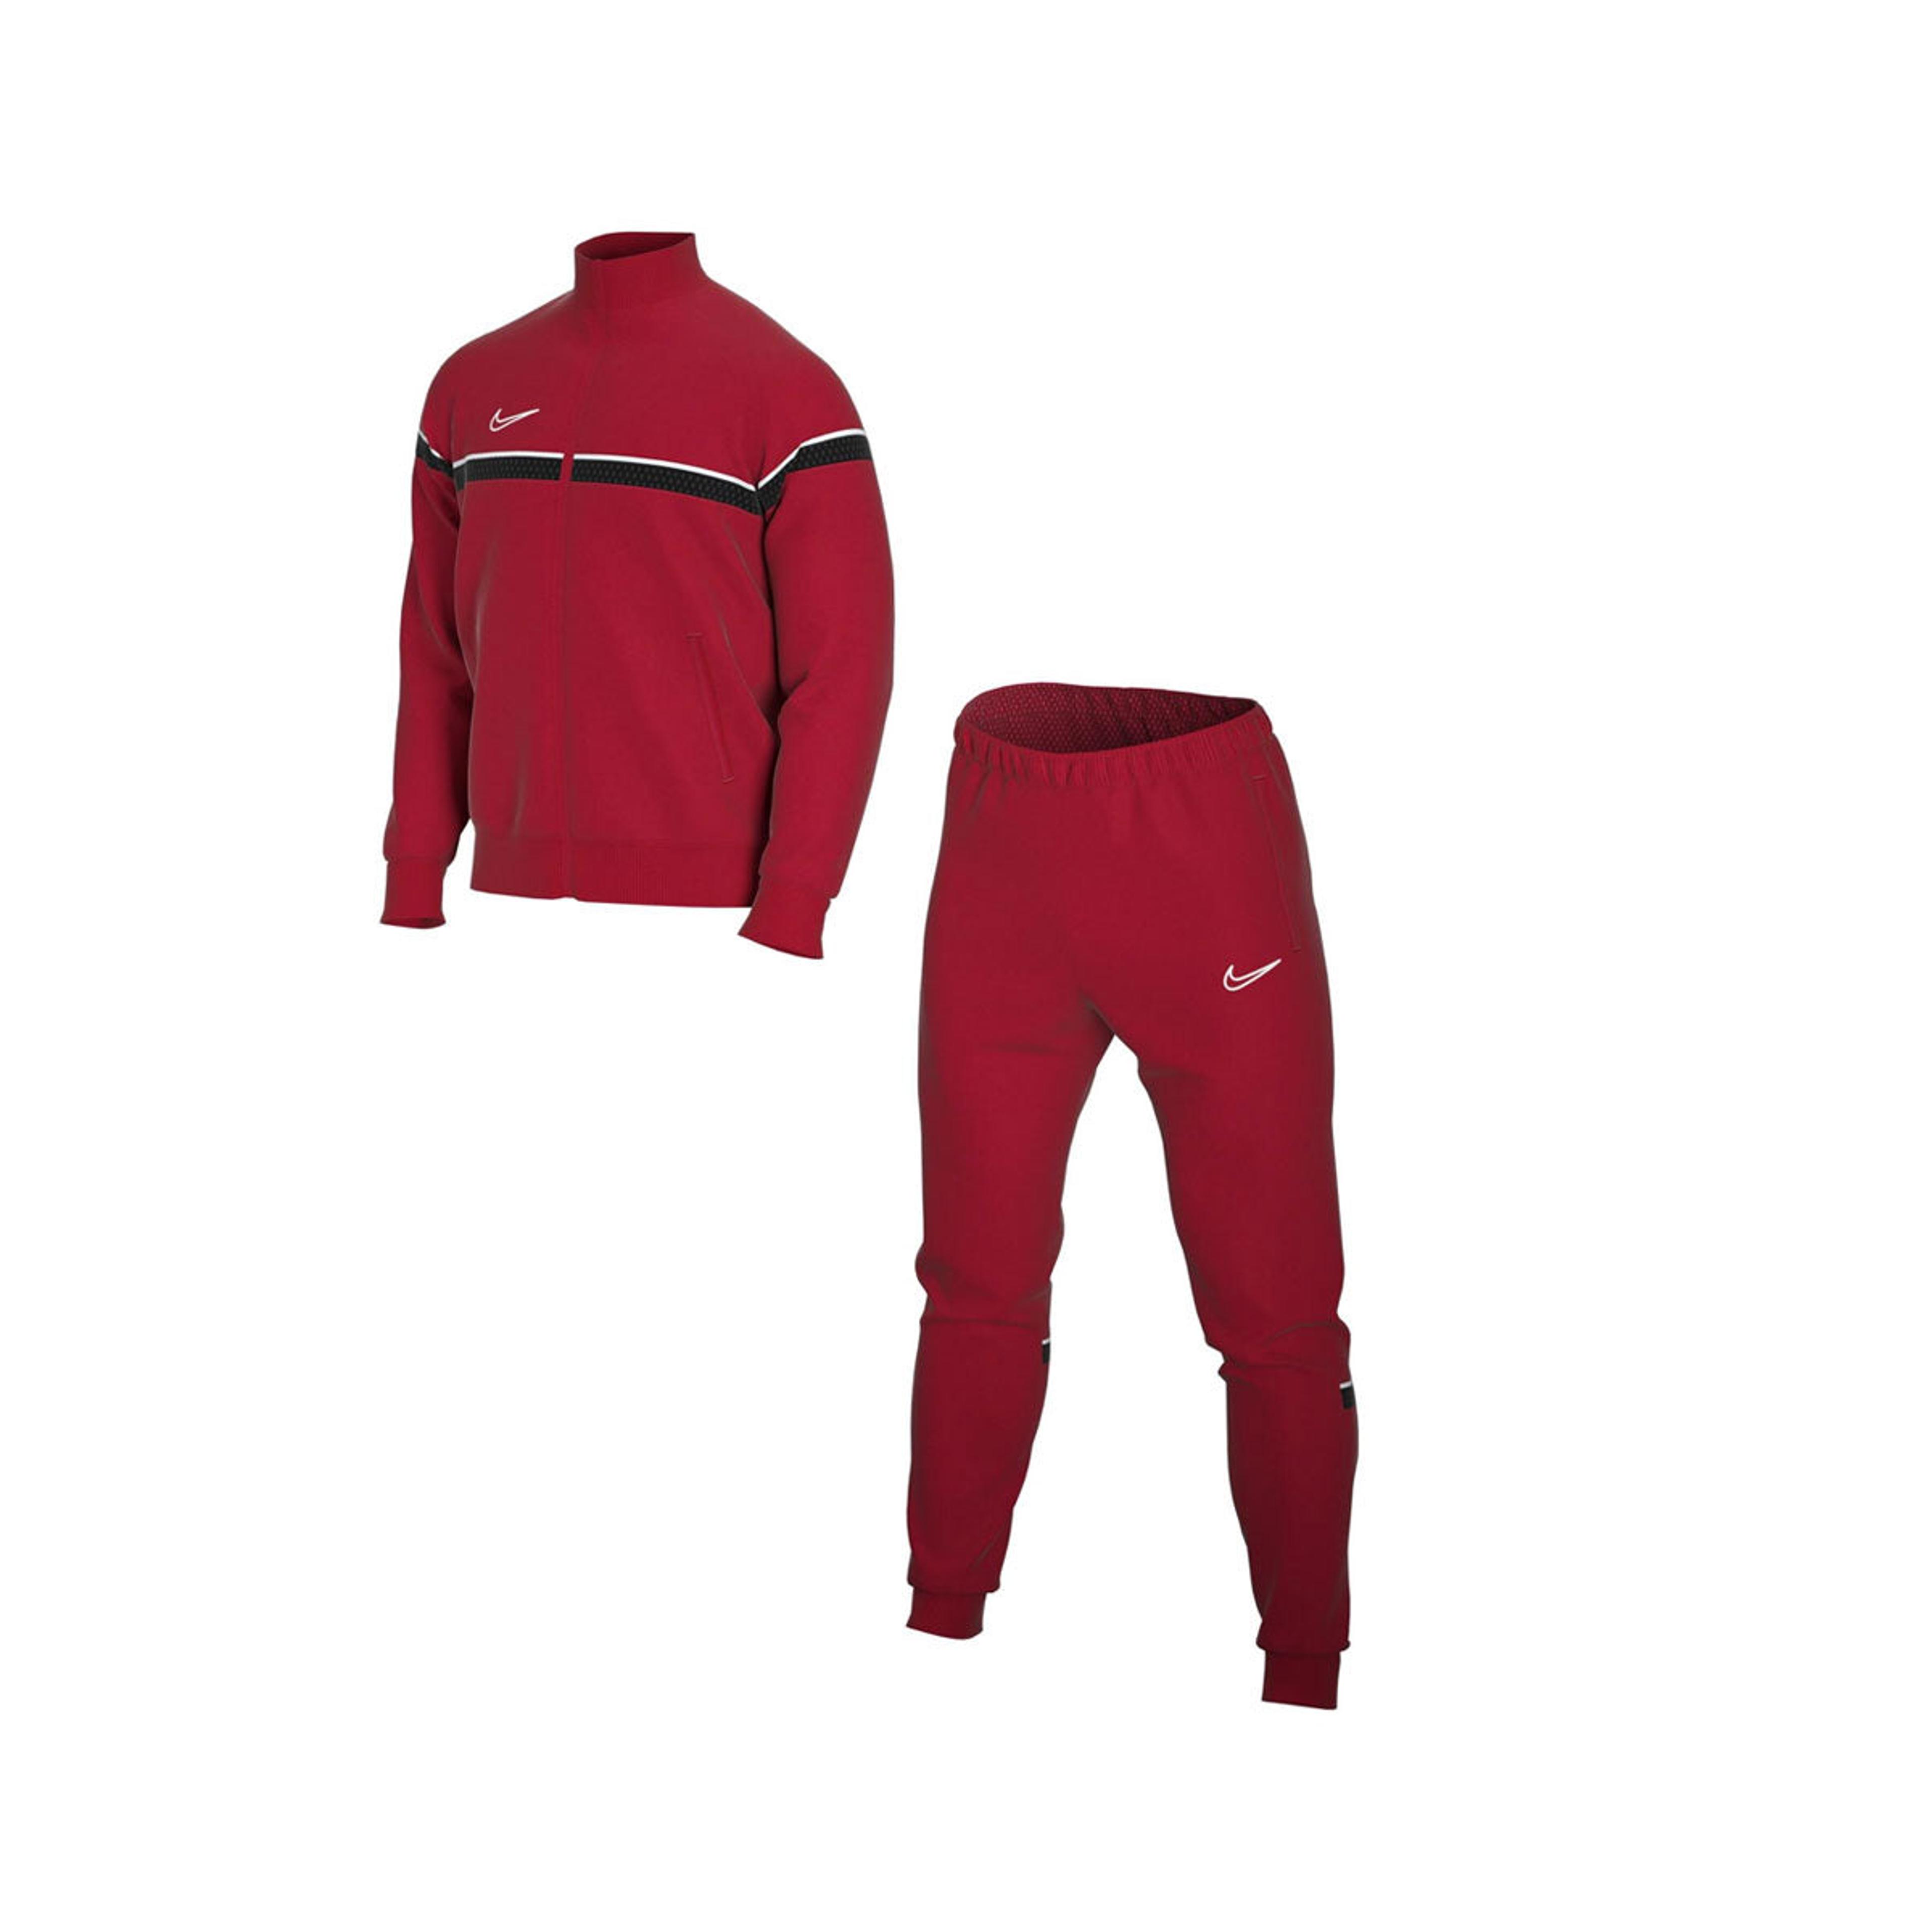 Alternate View 1 of Nike Men's Tracksuit Dri-FIT Academy